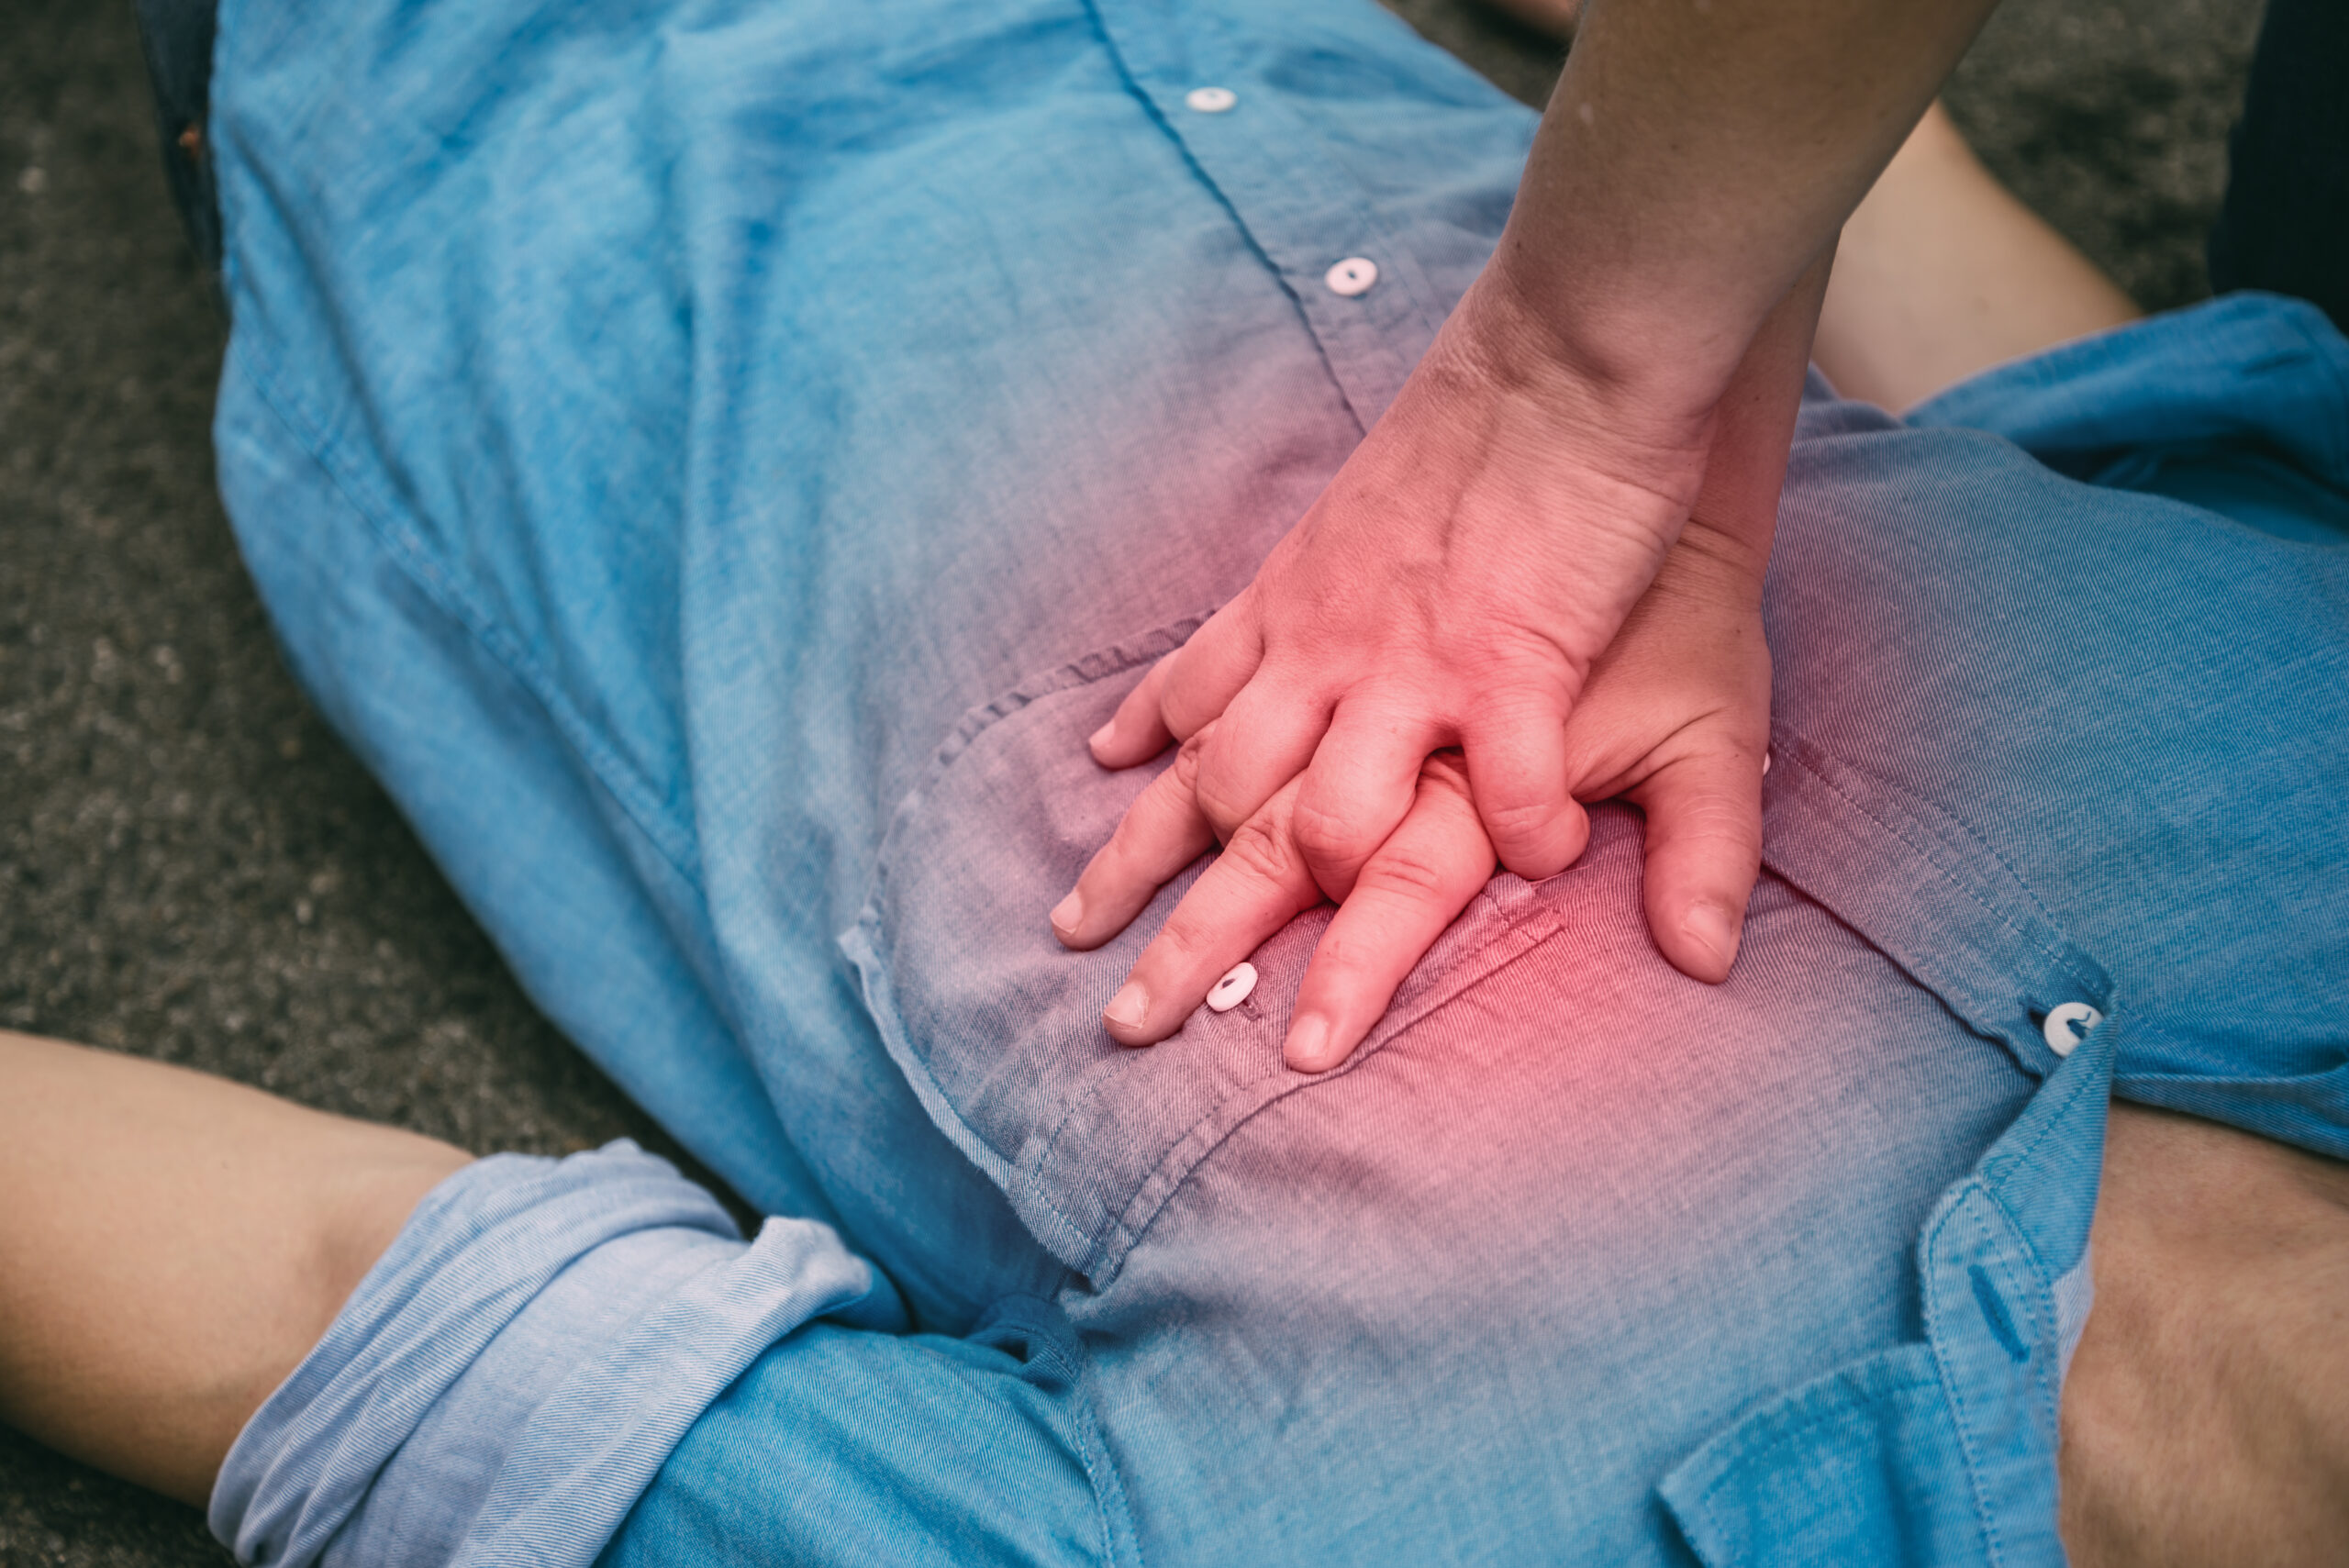 Close up of hands administering CPR on a chest that is glowing in the heart area, indicating cardiac arrest